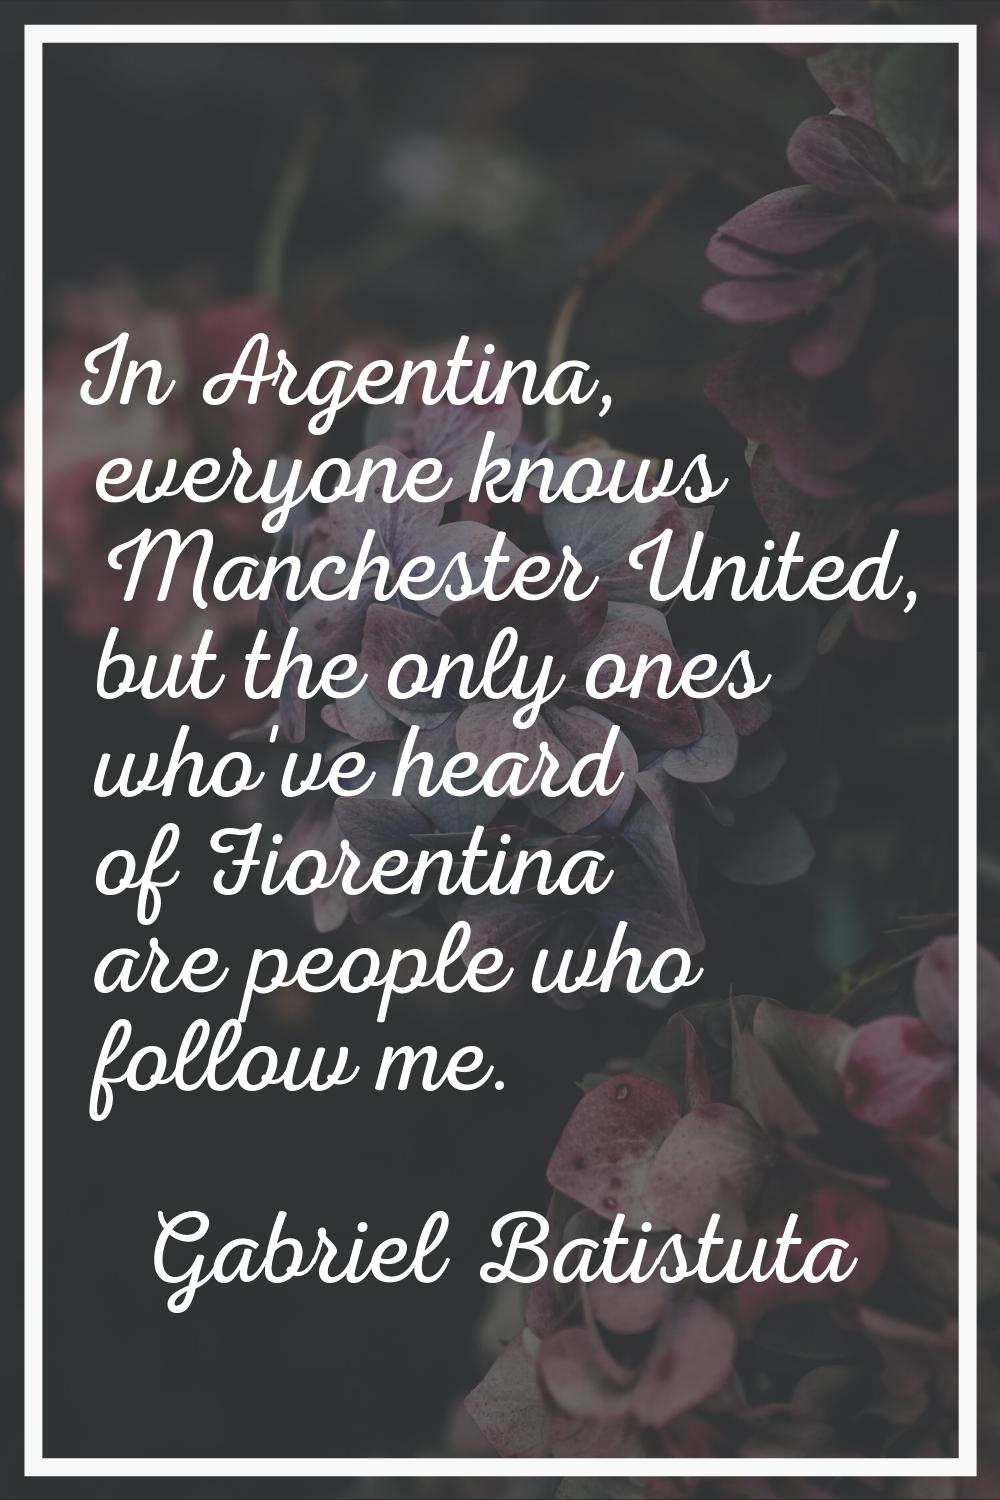 In Argentina, everyone knows Manchester United, but the only ones who've heard of Fiorentina are pe